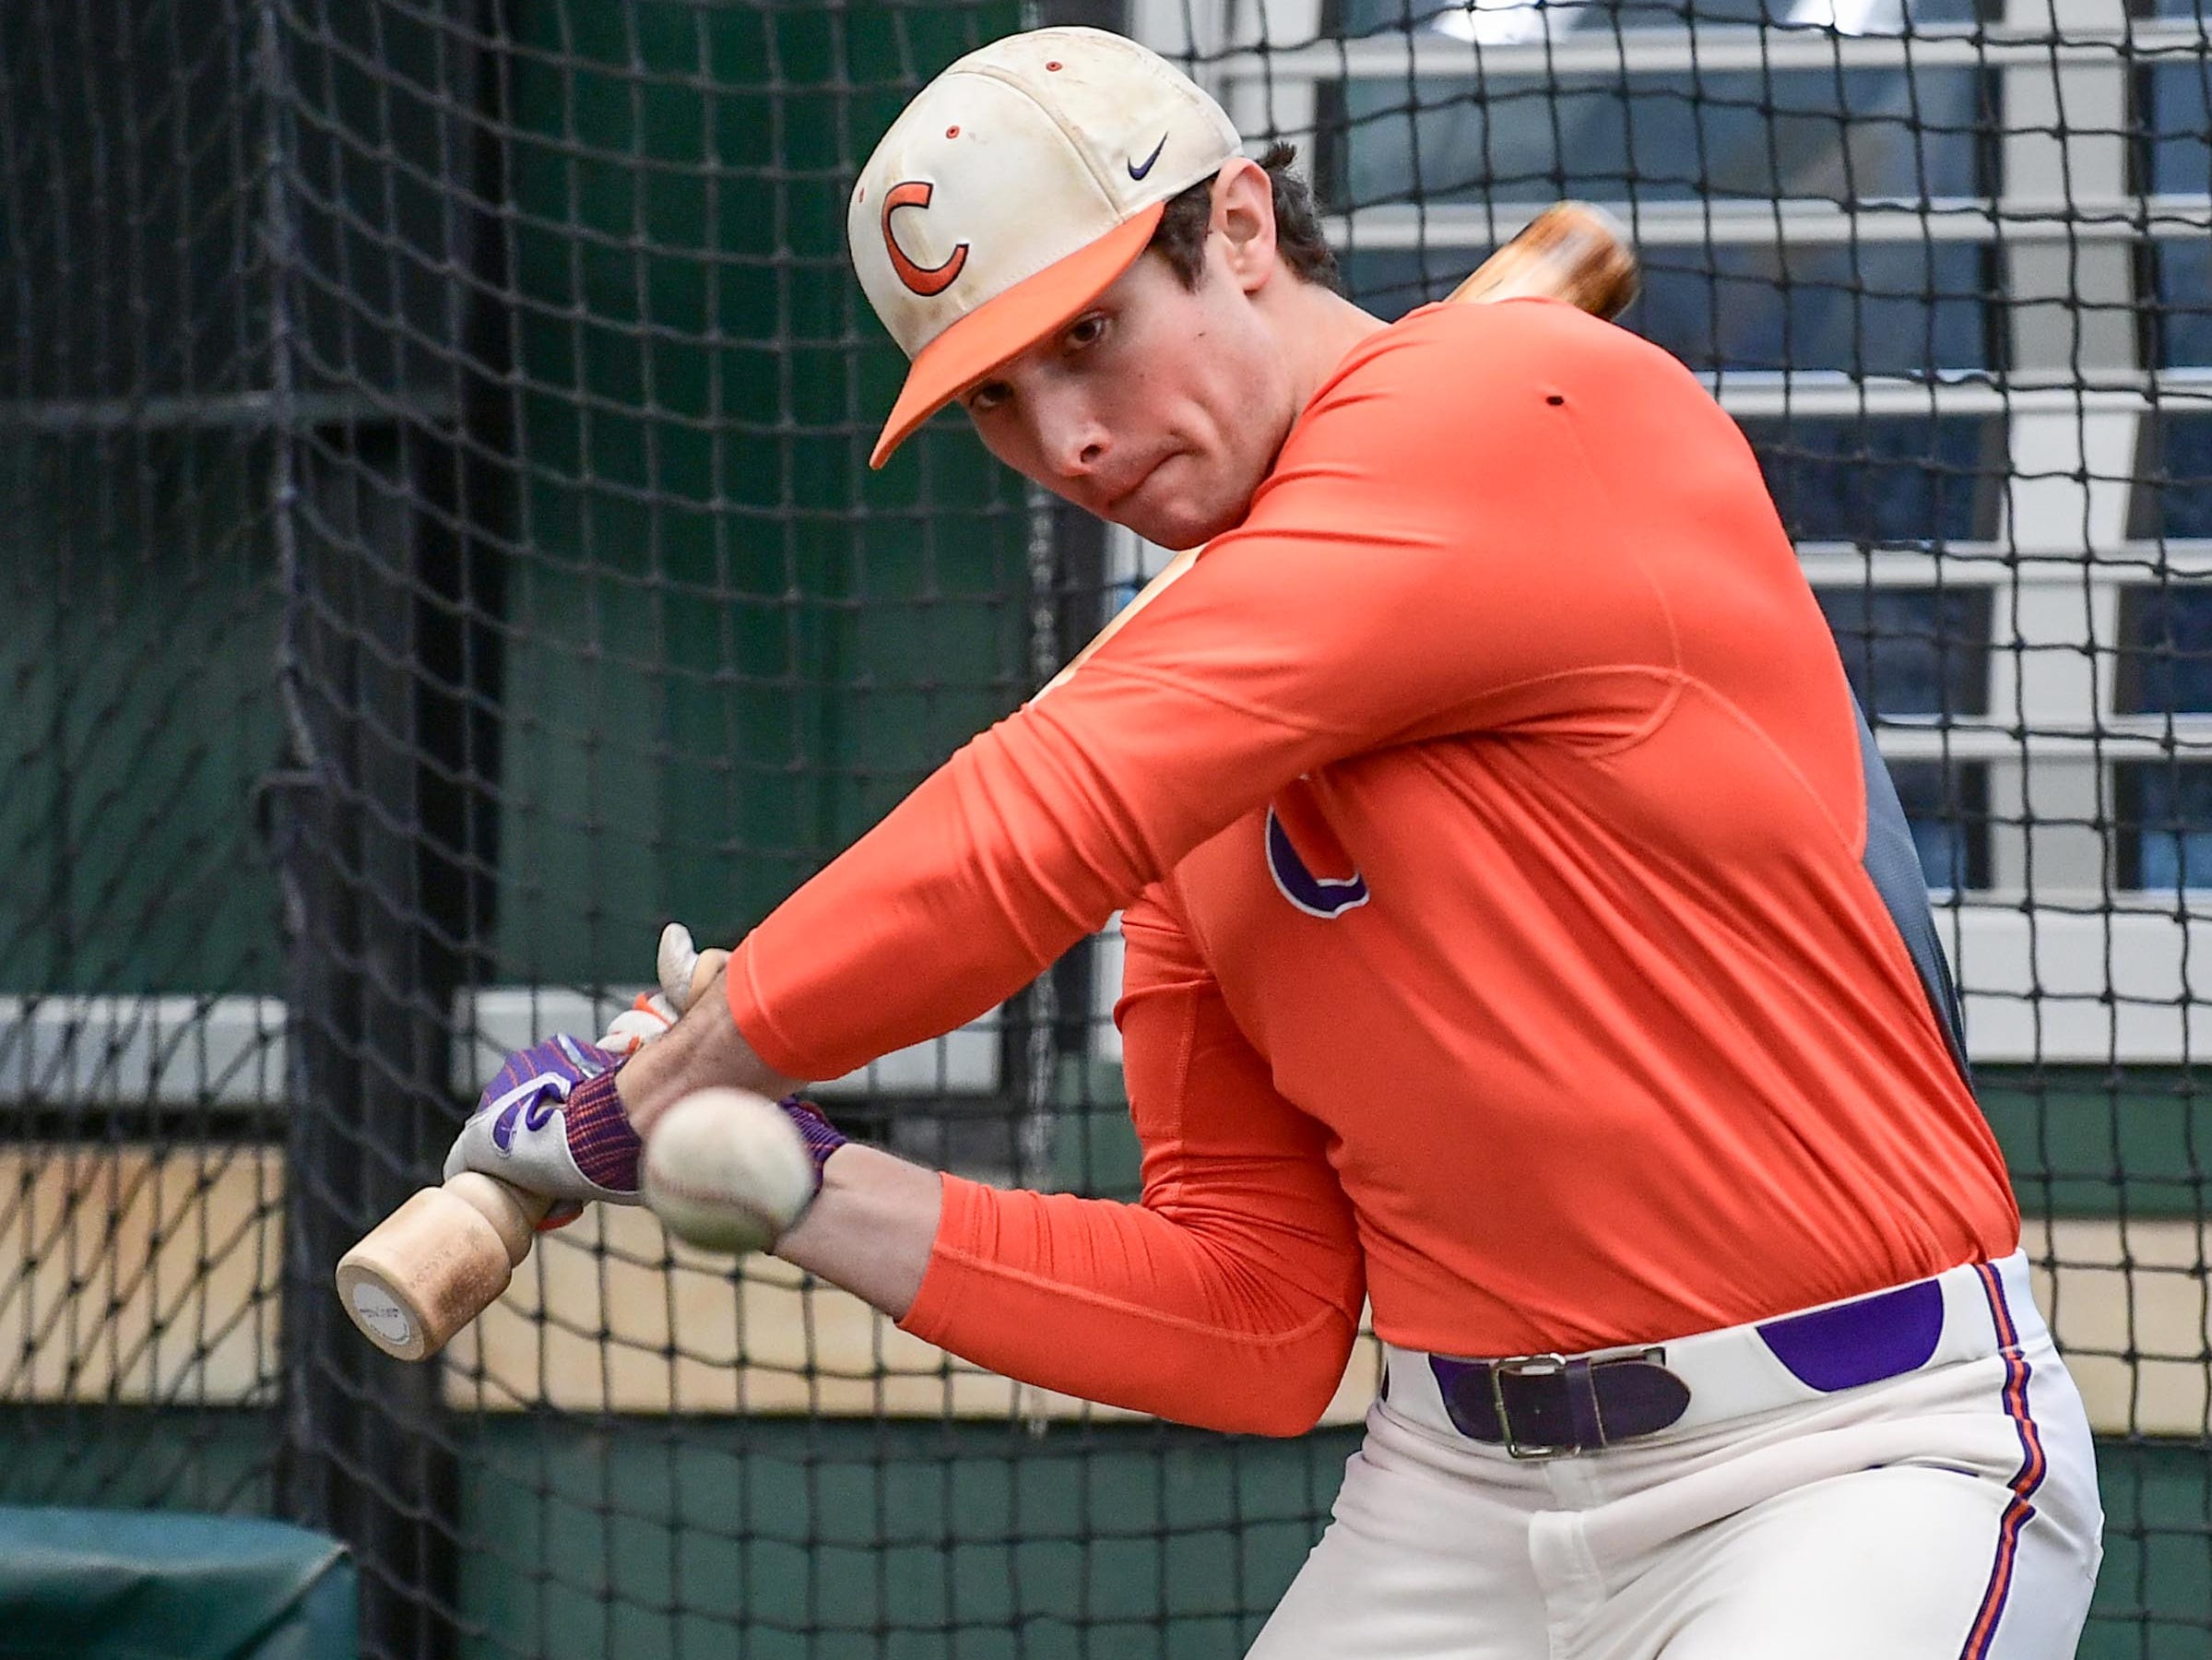 Clemson junior Bryce Teodosio (13) during batting practice at the first official team Spring practice at Doug Kingsmore Stadium in Clemson Friday, January 24, 2020.